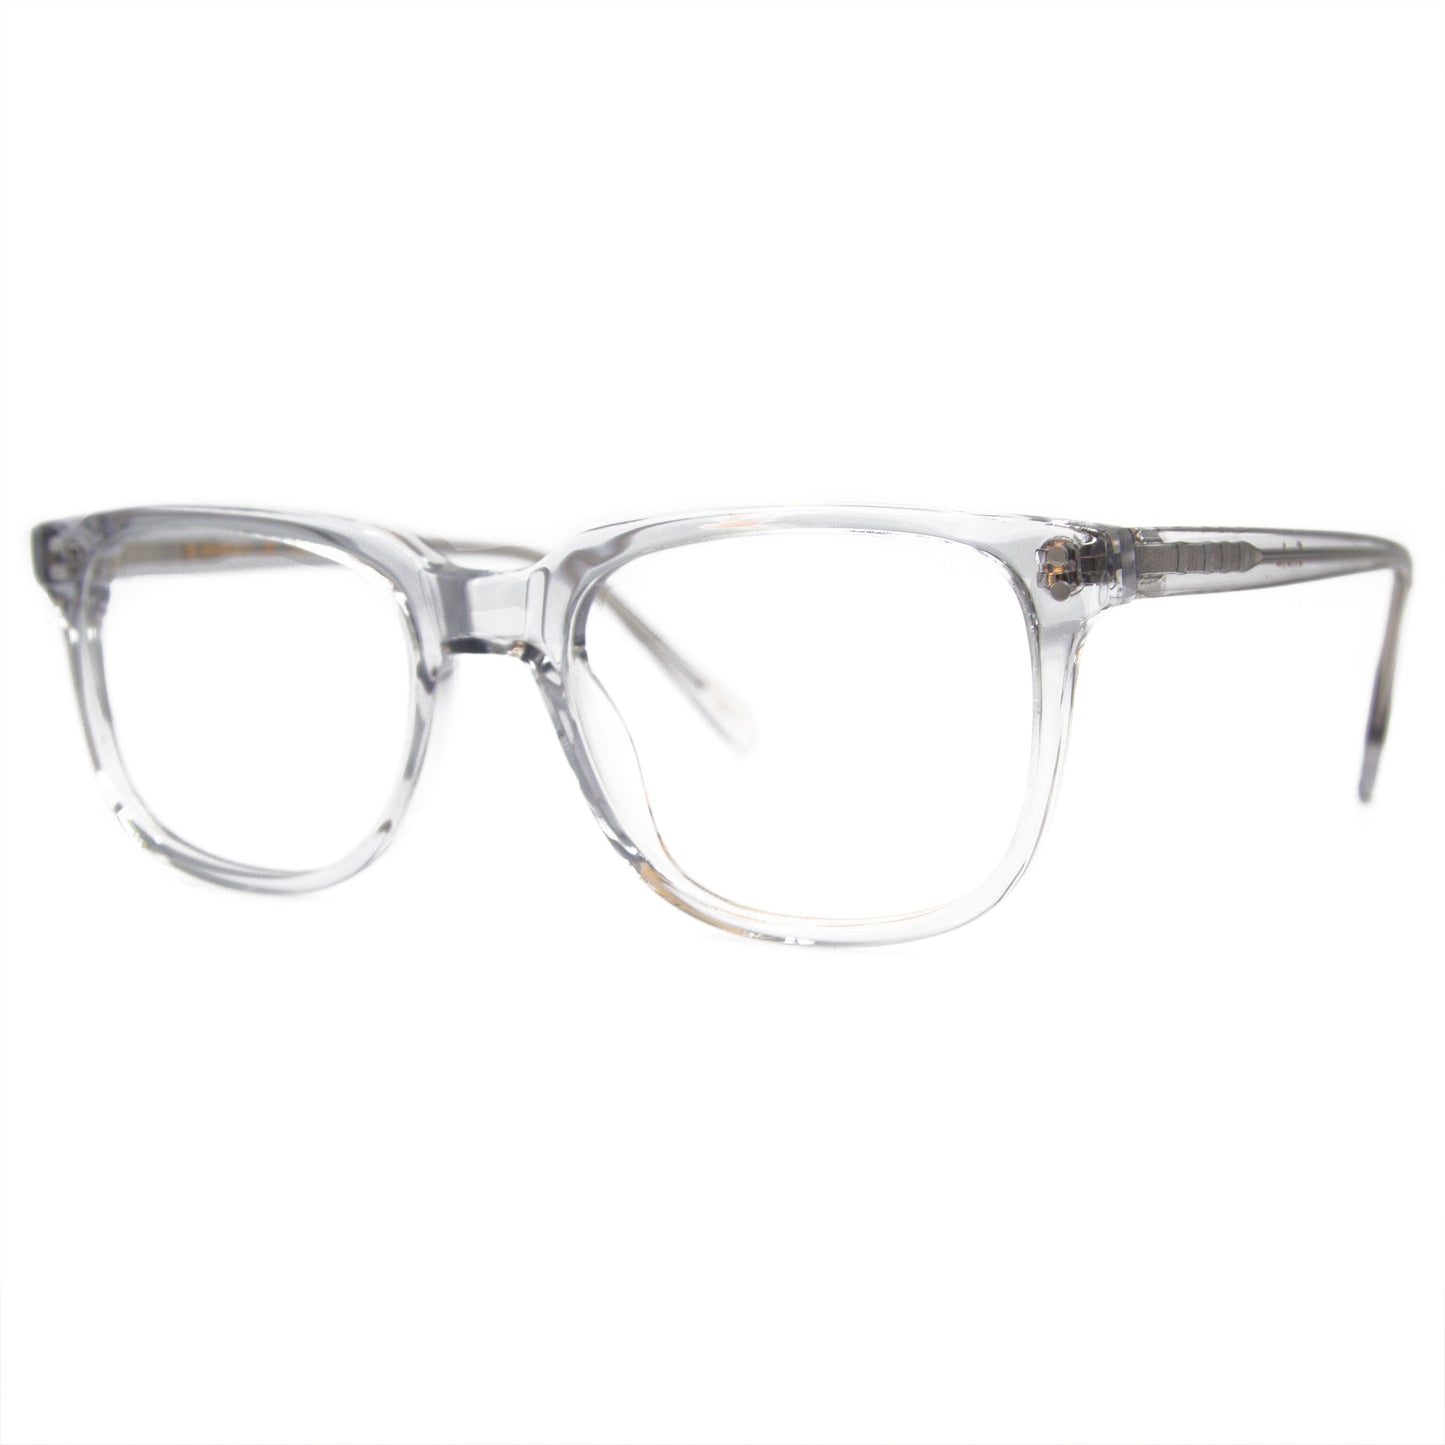 3 brothers - Theo - Crystal - Prescription Glasses - Side